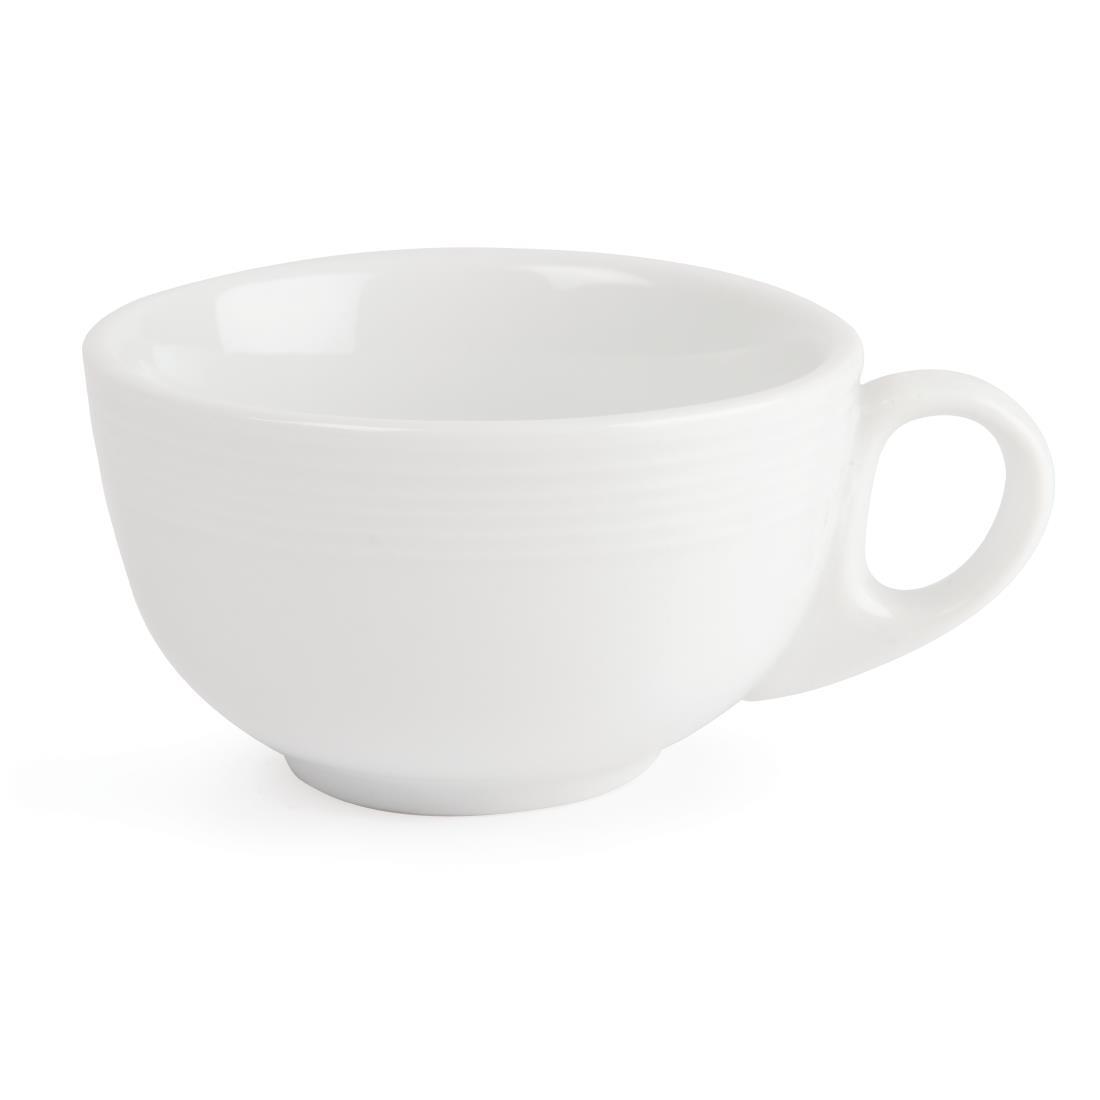 Olympia Linear Cappuccino Cups 206ml (Pack of 12) - U086  - 2